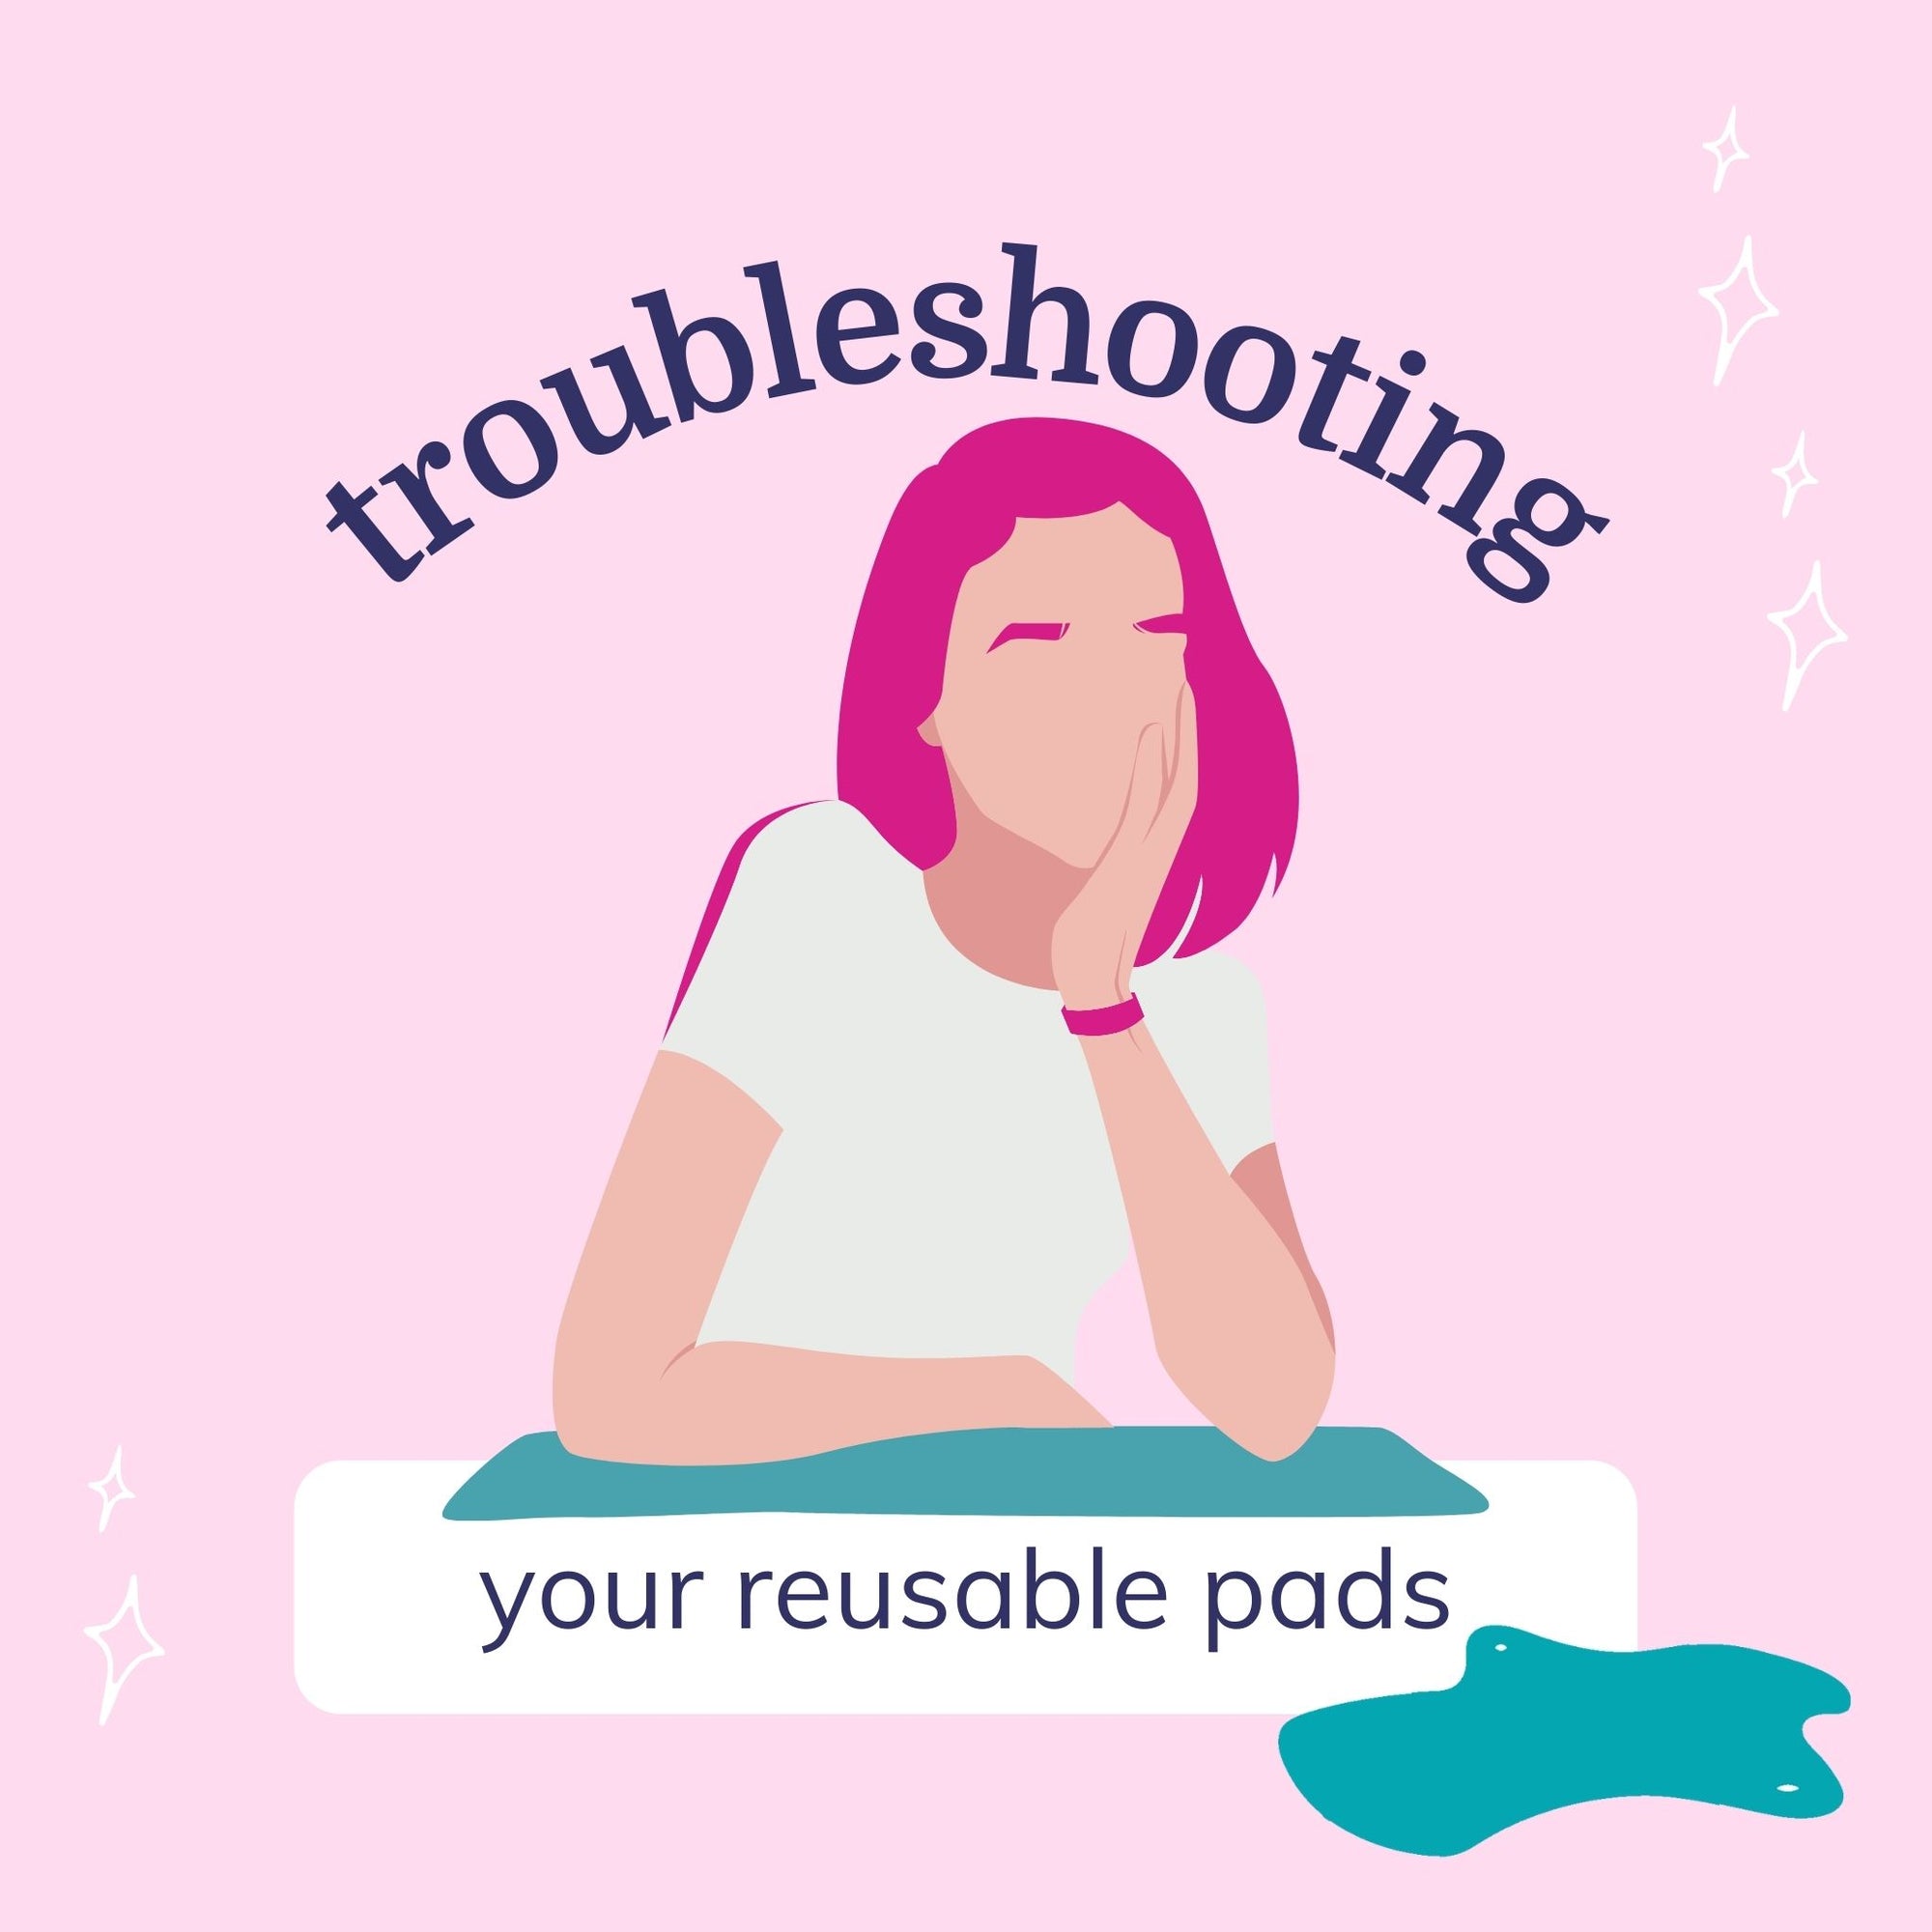 girl with pink hair resting chin hand thinking troubleshooting your reusable pads with teal pad icon in corner on pink background